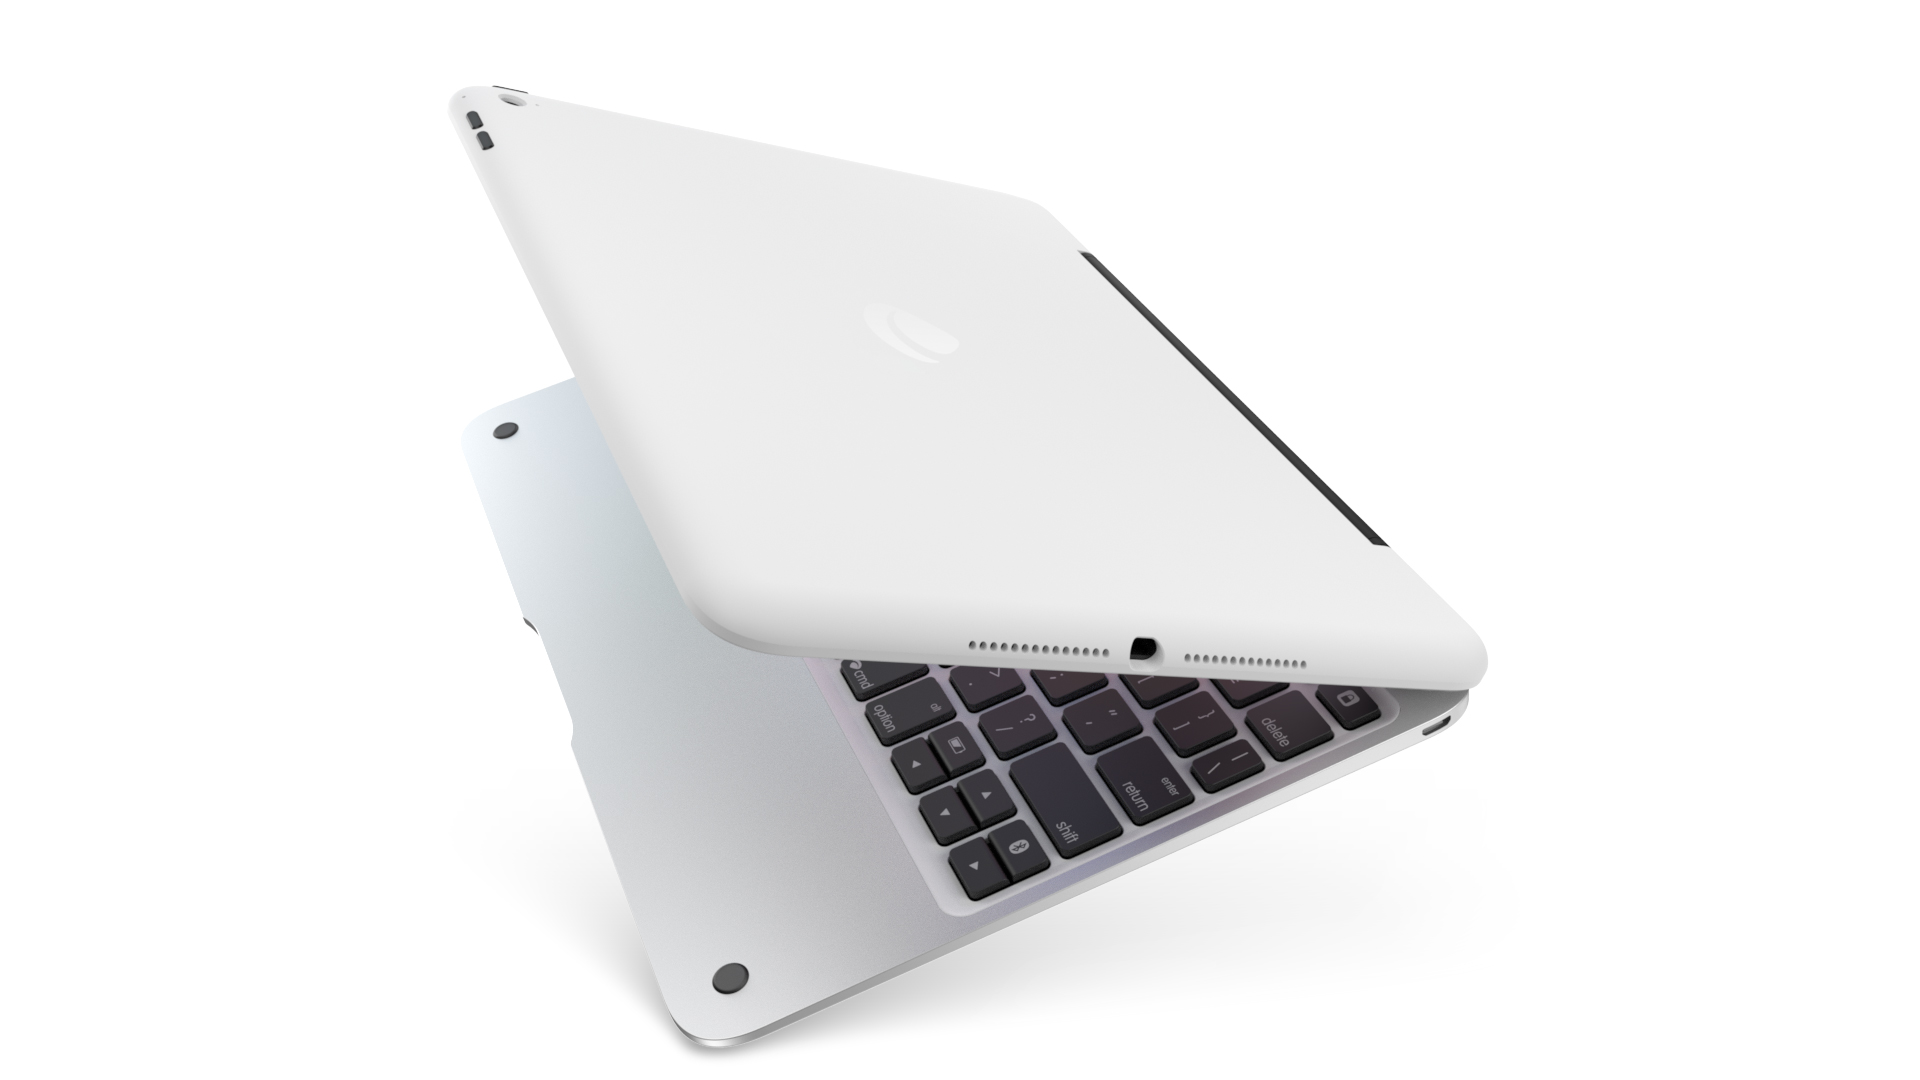 ClamCase Pro for iPad Air 2